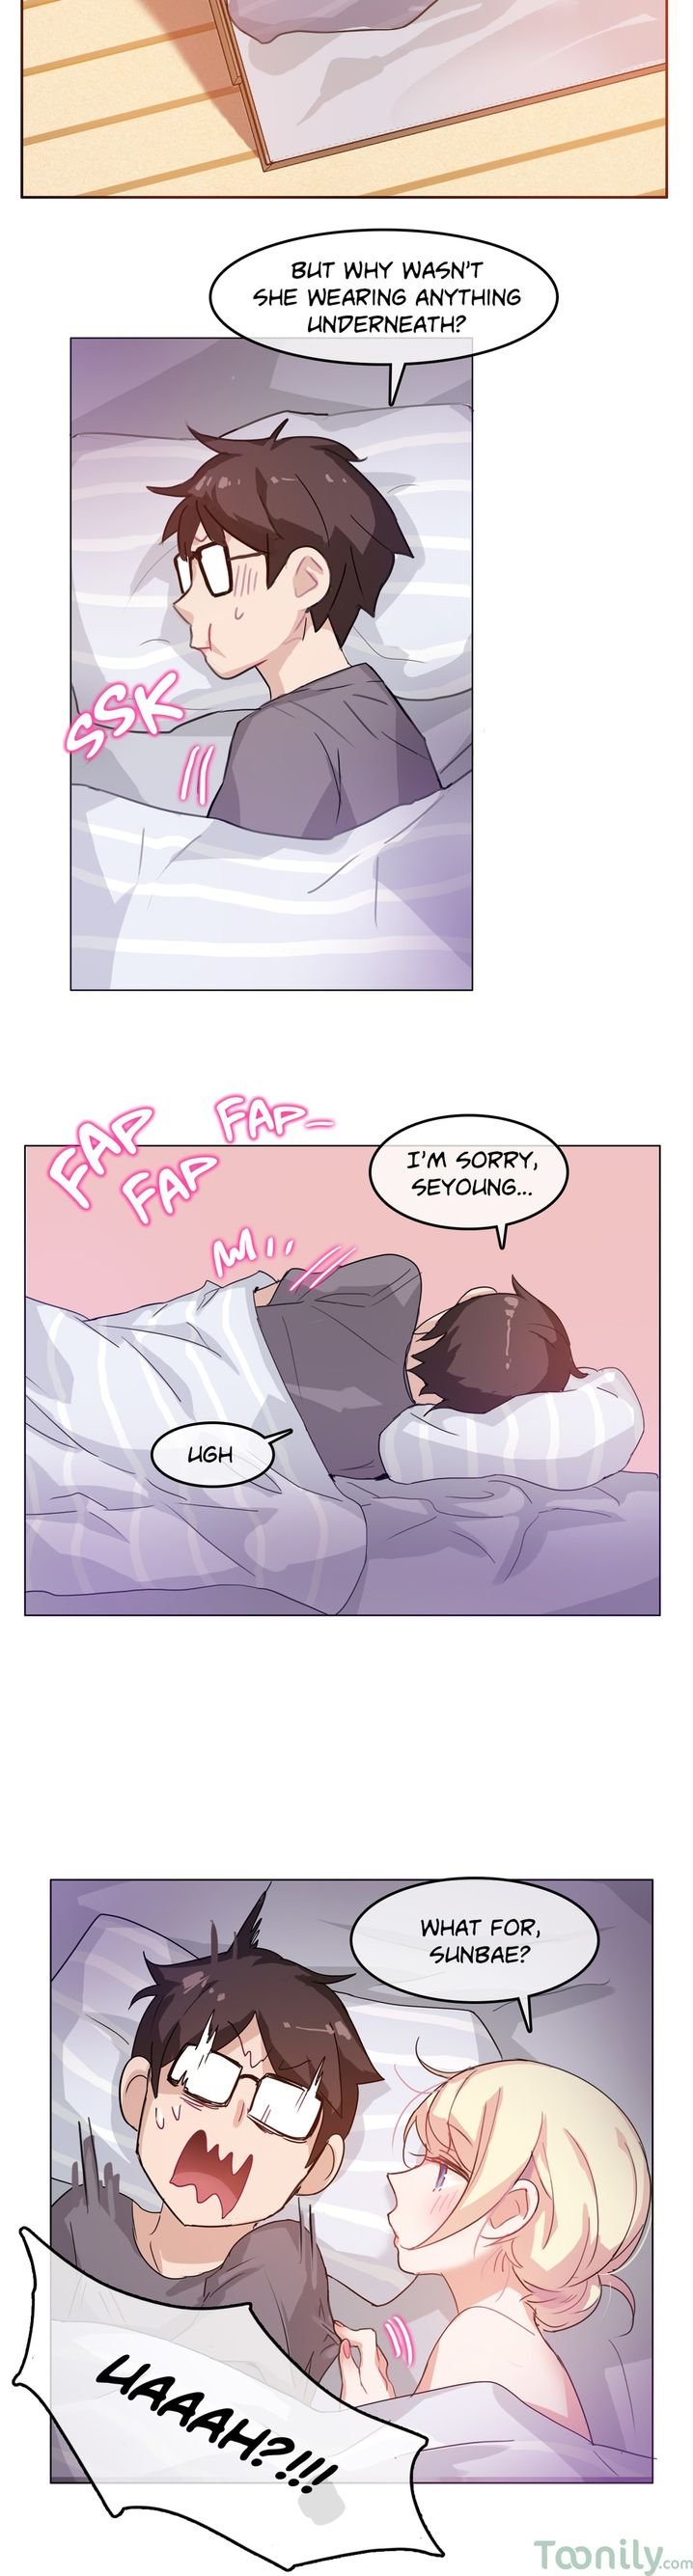 a-perverts-daily-life-chap-4-1